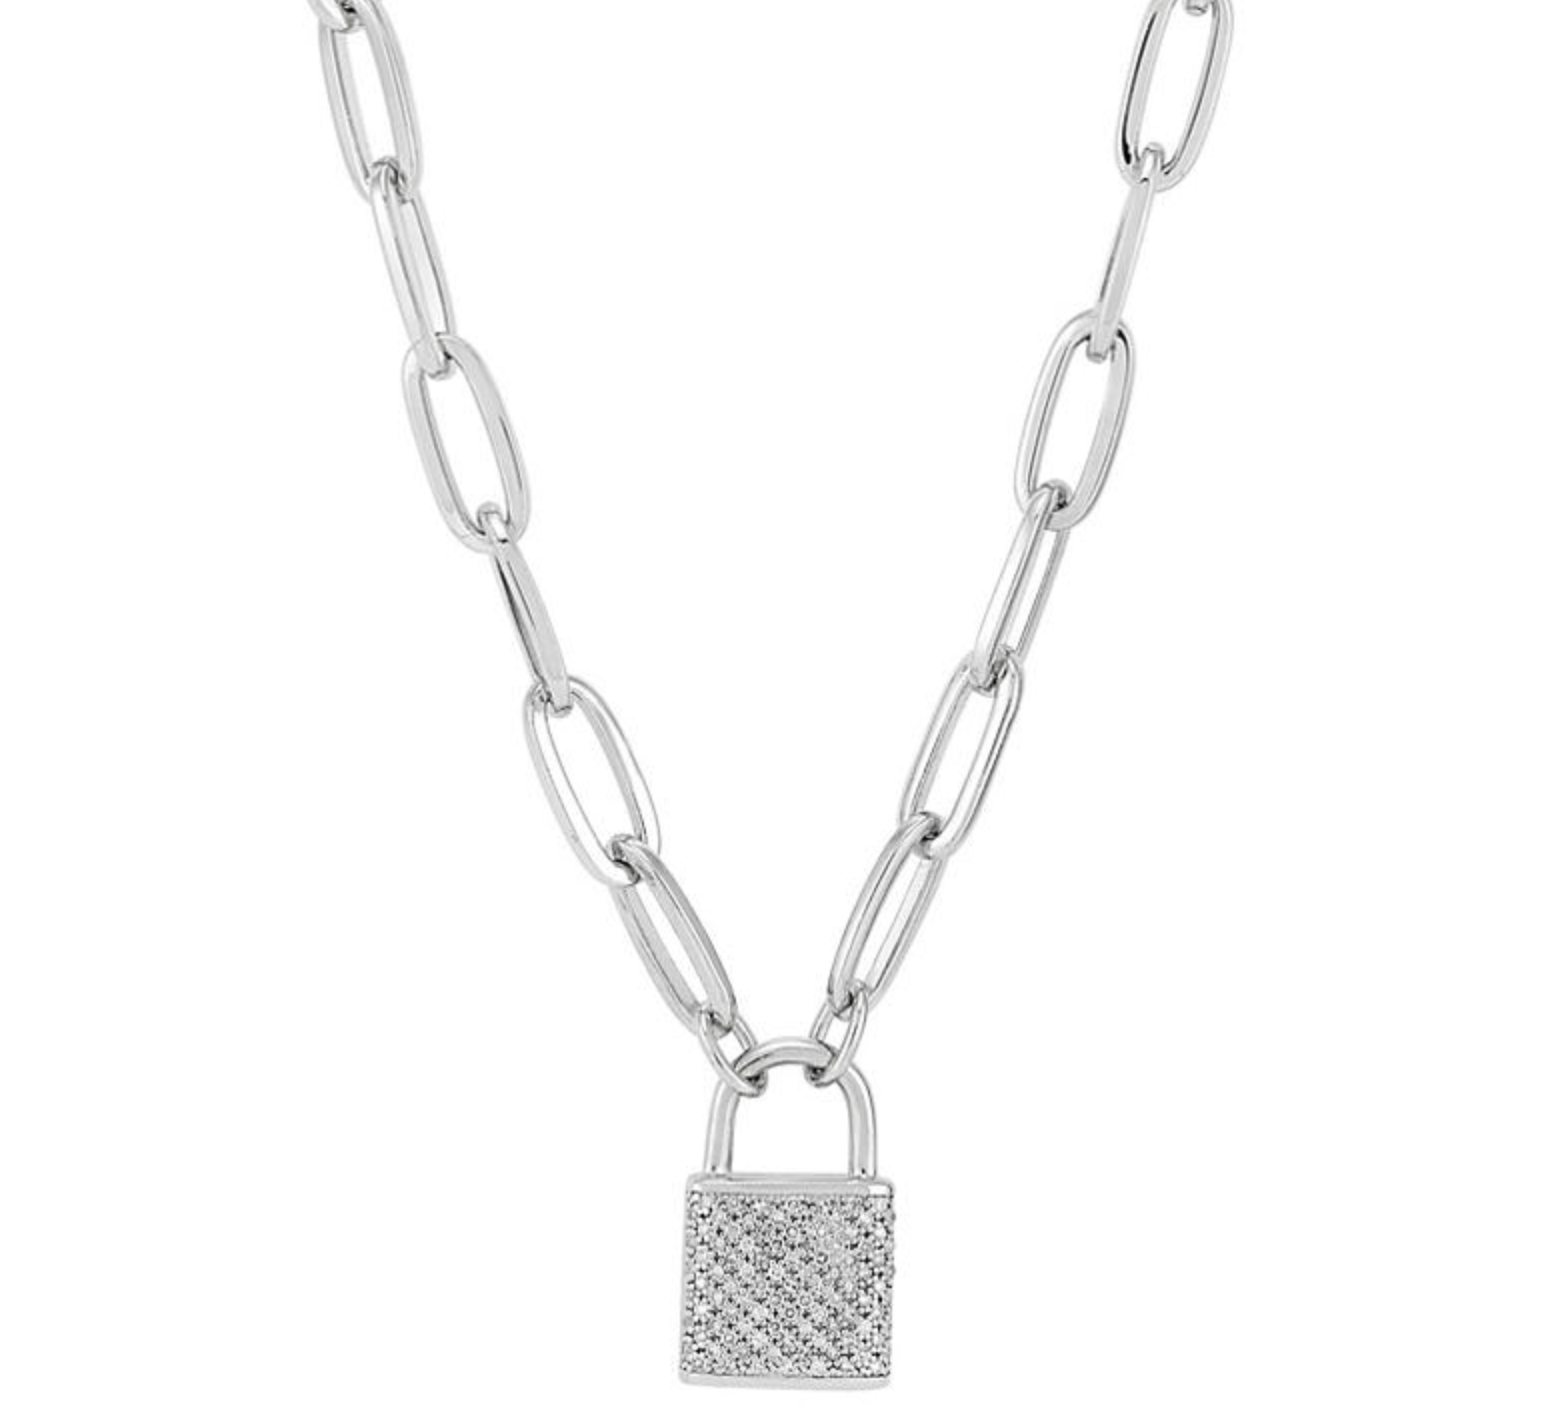 Silver chain necklace with diamond padlock charm